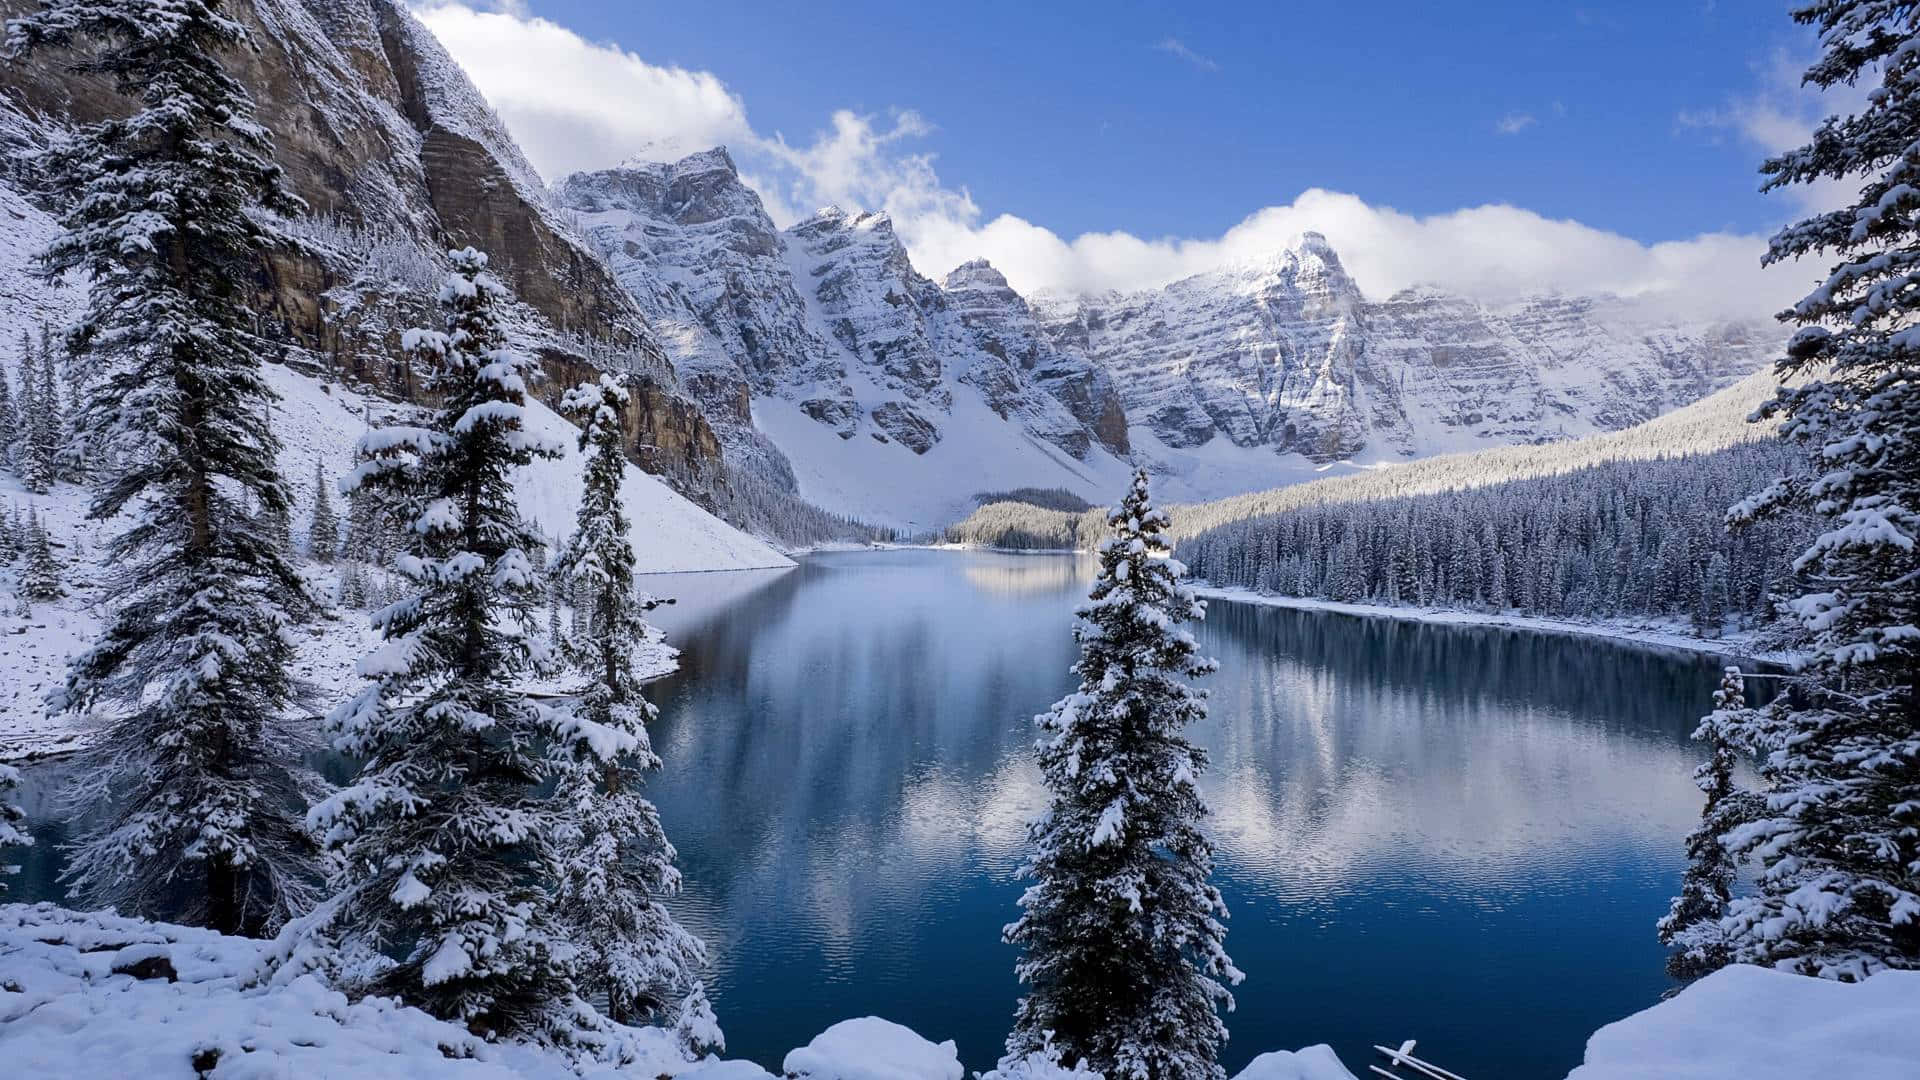 Discover the Magic of Winter With This Stunning Panoramic Landscape